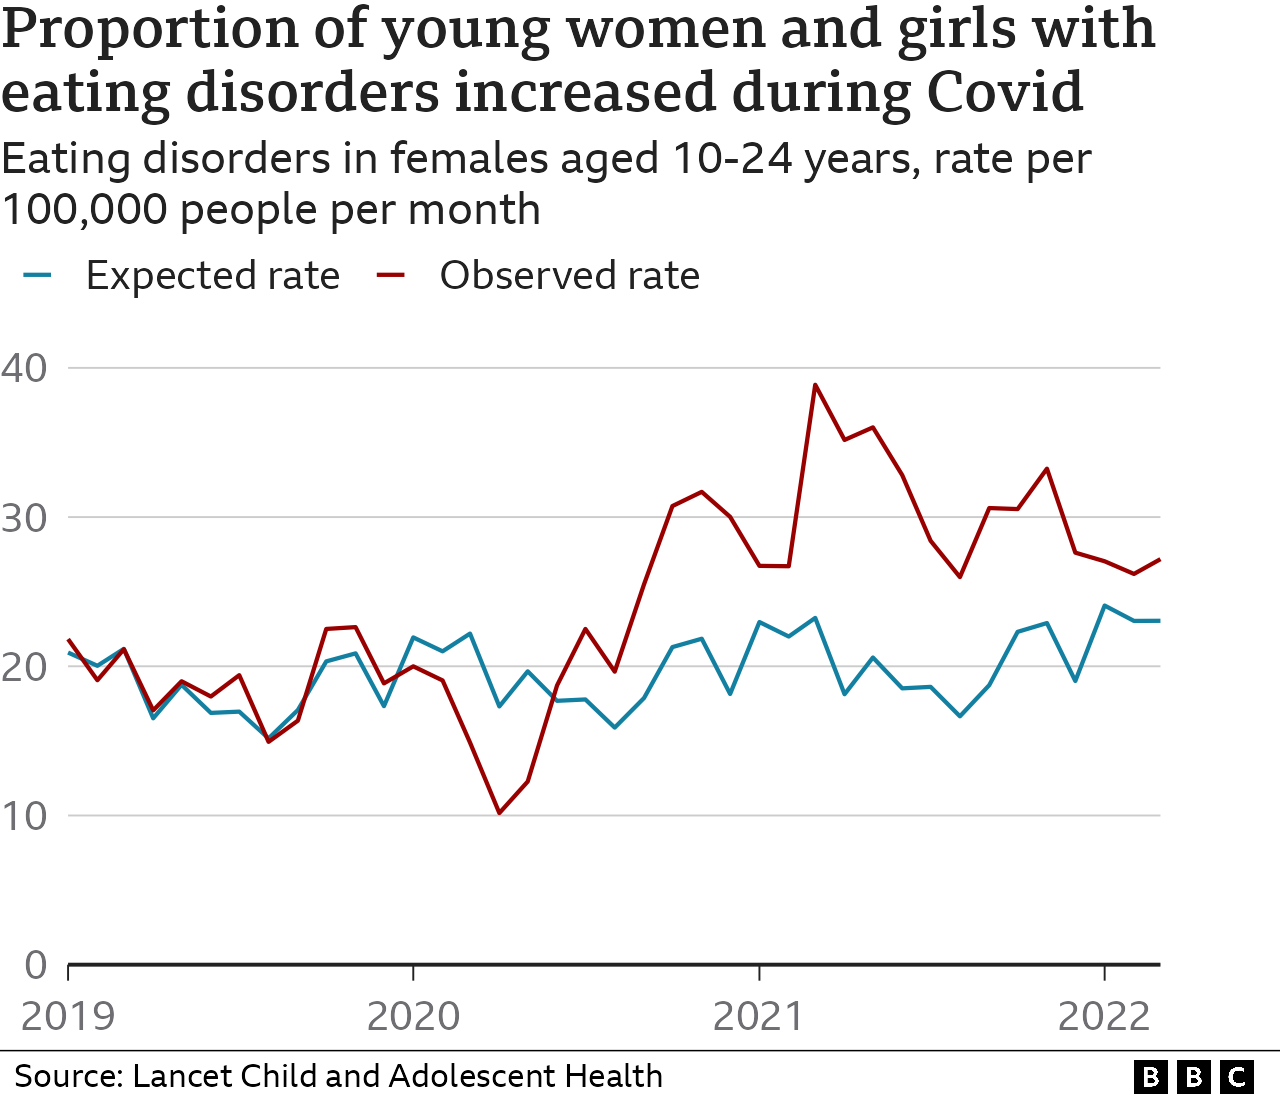 Chart on girls and young women with eating disorders during pandemic